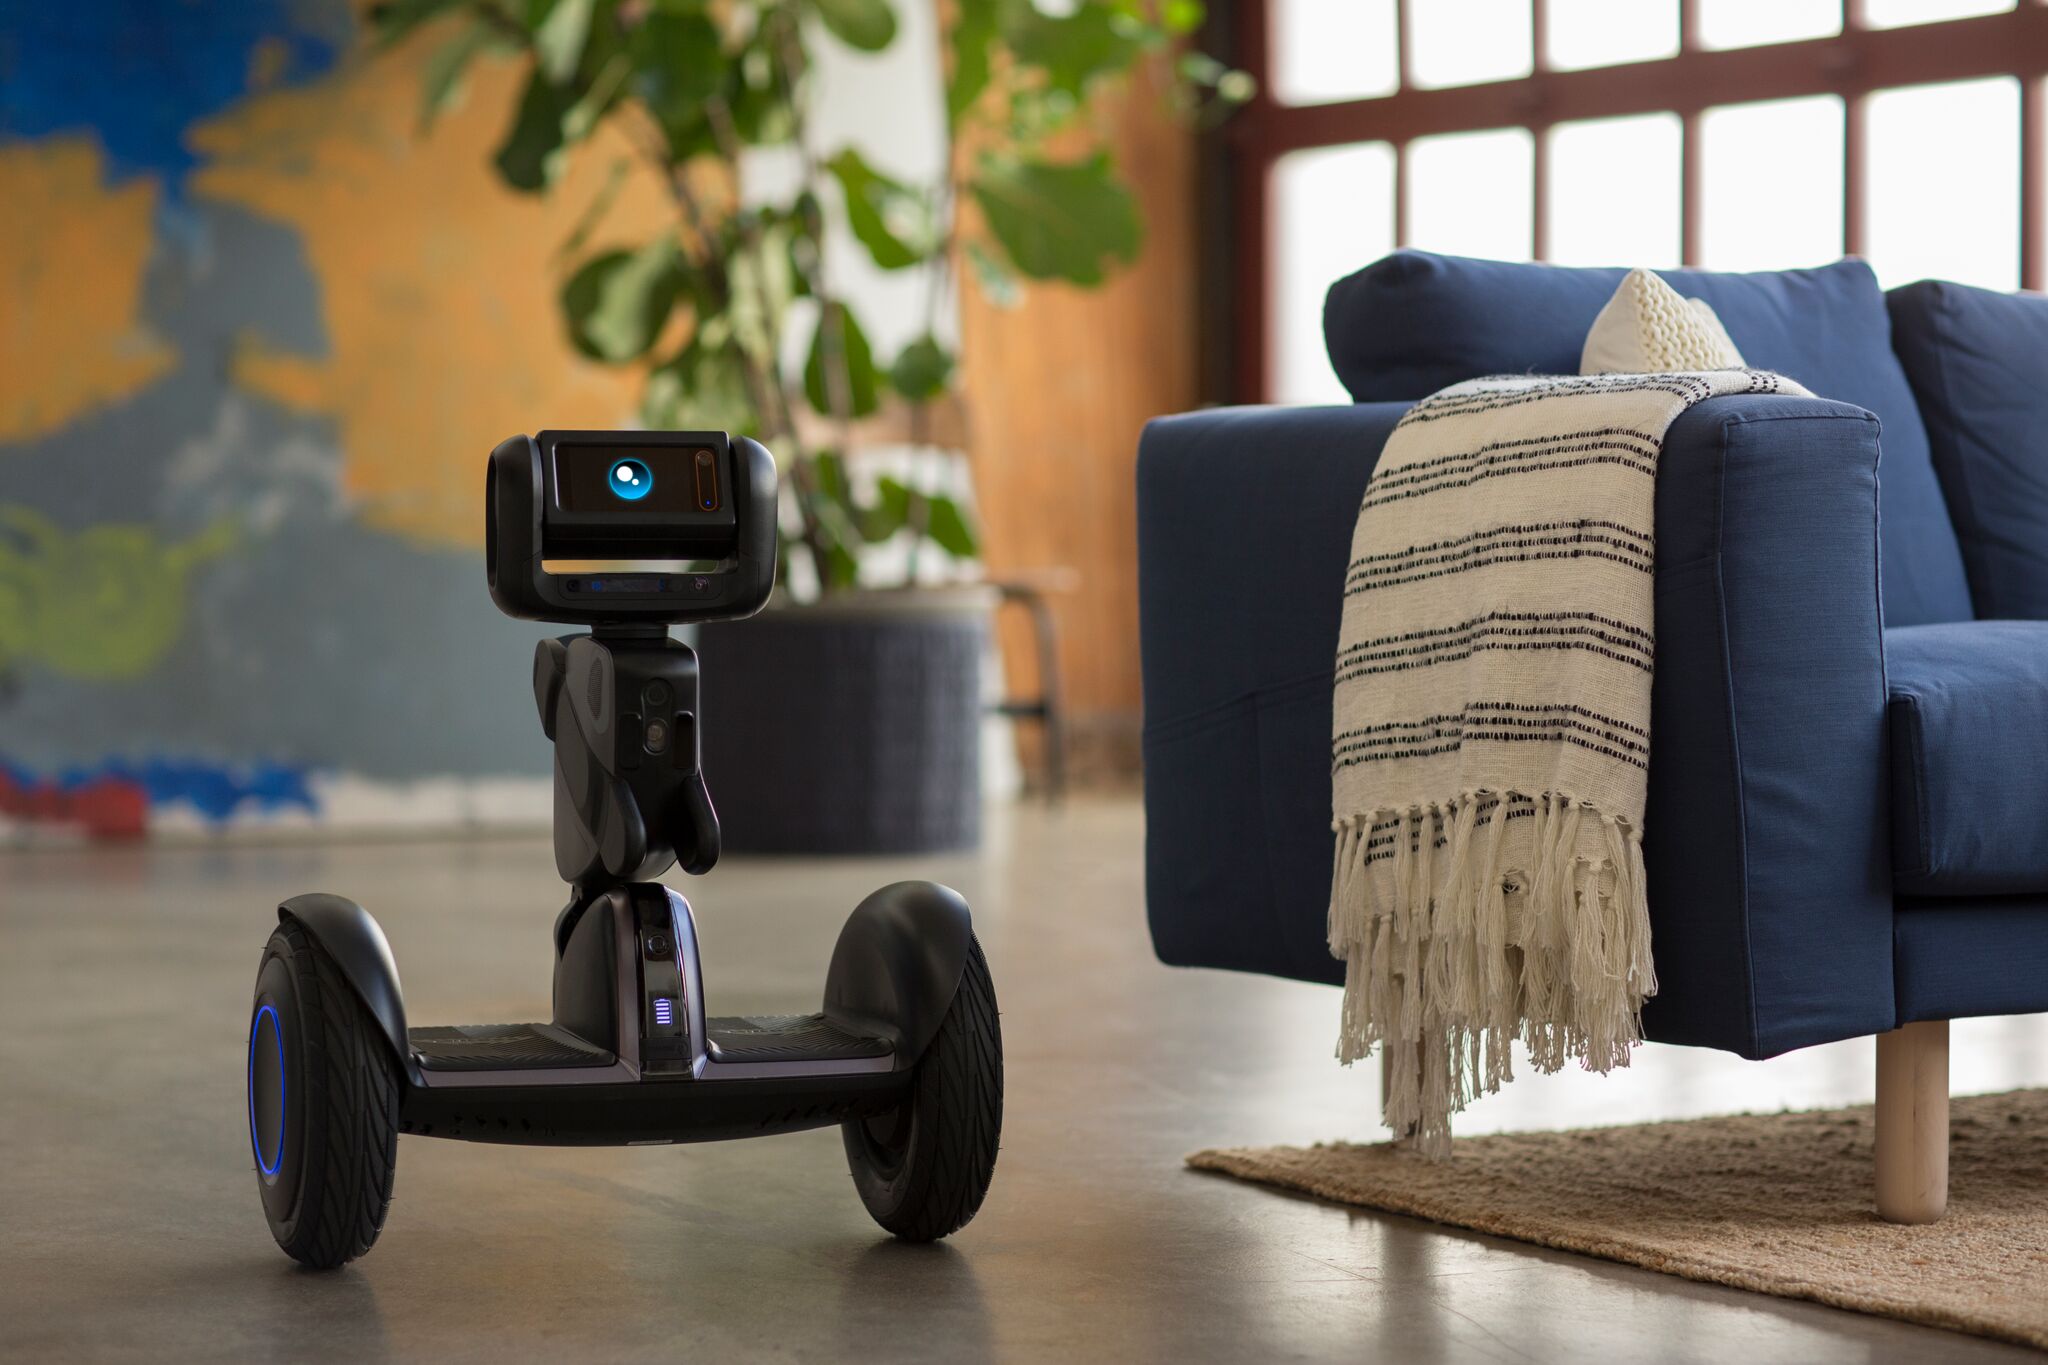 With Loomo, Segway takes robotics far from the home